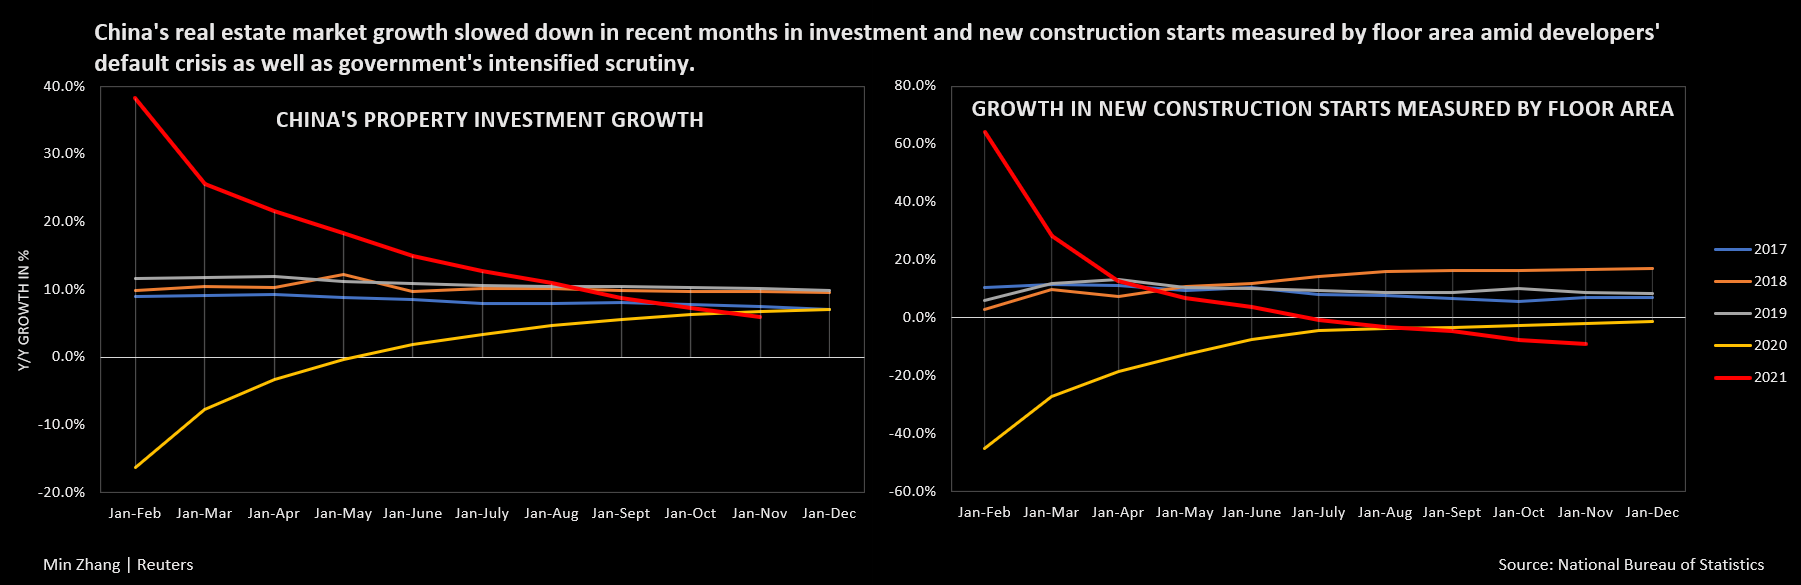 Growth in real estate investment in China and new construction starts as measured by floor space have fallen in recent months due to the developer default crisis and government controls.